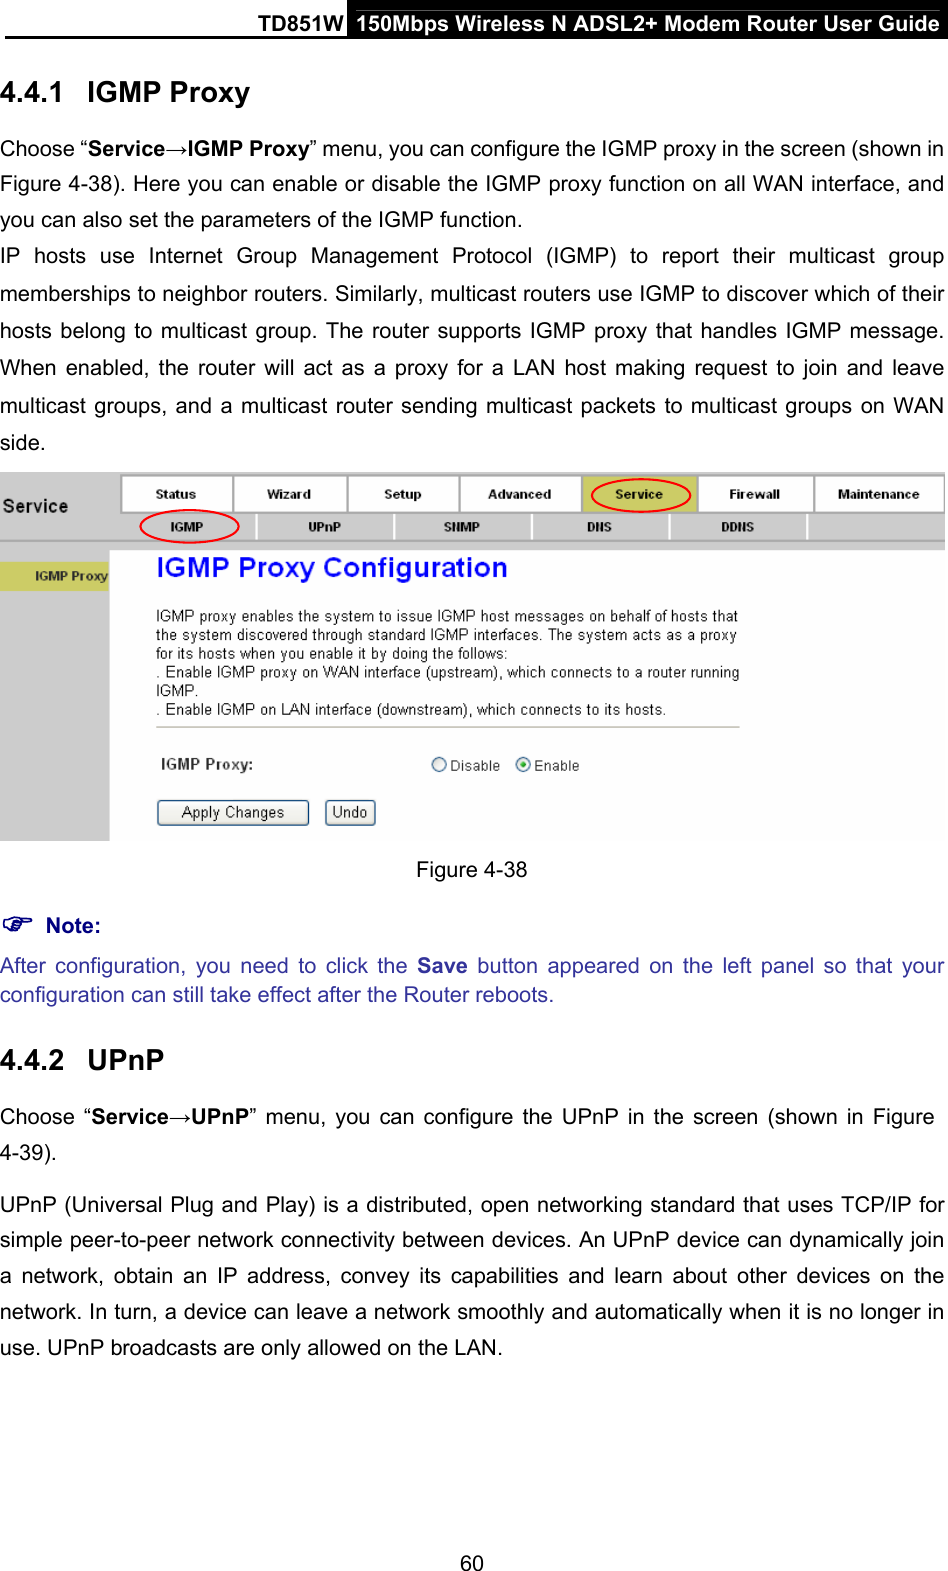 TD851W  150Mbps Wireless N ADSL2+ Modem Router User Guide 4.4.1  IGMP Proxy Choose “Service→IGMP Proxy” menu, you can configure the IGMP proxy in the screen (shown in Figure 4-38). Here you can enable or disable the IGMP proxy function on all WAN interface, and you can also set the parameters of the IGMP function. IP hosts use Internet Group Management Protocol (IGMP) to report their multicast group memberships to neighbor routers. Similarly, multicast routers use IGMP to discover which of their hosts belong to multicast group. The router supports IGMP proxy that handles IGMP message. When enabled, the router will act as a proxy for a LAN host making request to join and leave multicast groups, and a multicast router sending multicast packets to multicast groups on WAN side.  Figure 4-38 ) Note: After configuration, you need to click the Save button appeared on the left panel so that your configuration can still take effect after the Router reboots. 4.4.2  UPnP Choose “Service→UPnP” menu, you can configure the UPnP in the screen (shown in Figure 4-39). UPnP (Universal Plug and Play) is a distributed, open networking standard that uses TCP/IP for simple peer-to-peer network connectivity between devices. An UPnP device can dynamically join a network, obtain an IP address, convey its capabilities and learn about other devices on the network. In turn, a device can leave a network smoothly and automatically when it is no longer in use. UPnP broadcasts are only allowed on the LAN. 60 